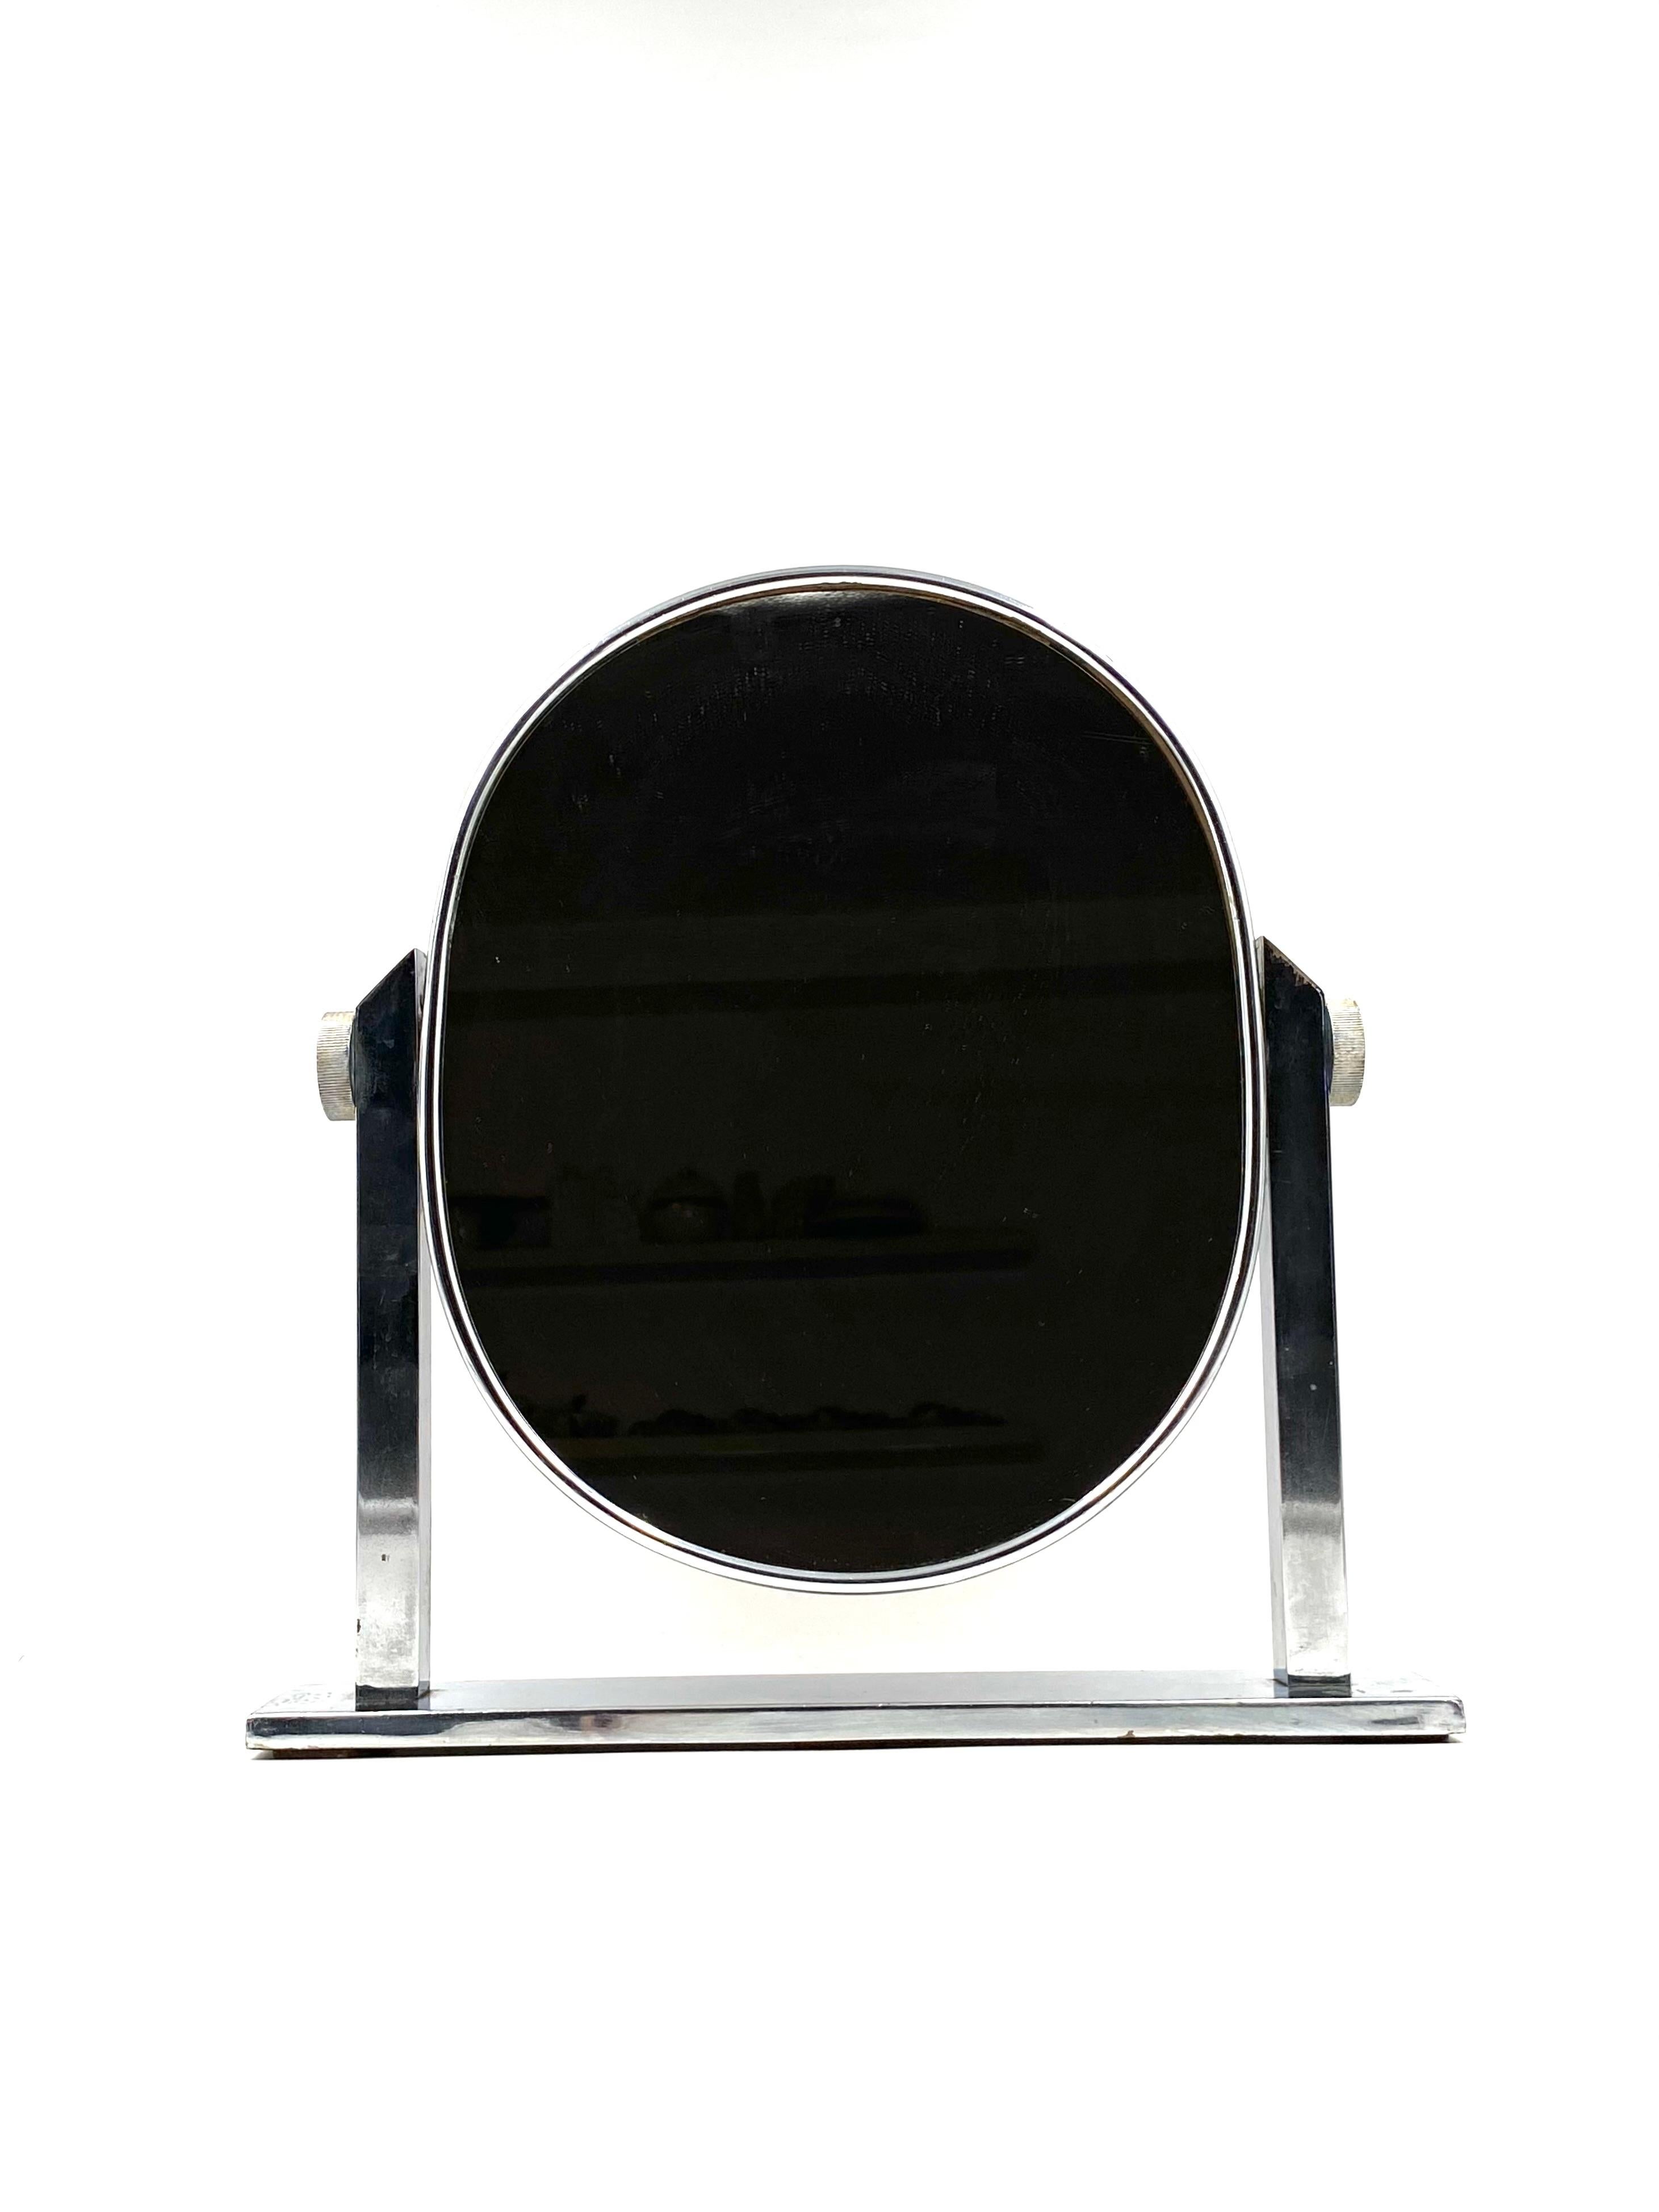 Midcentury Nickel-Plated Brass Table Mirror / Vanity, Italy, 1960s For Sale 2